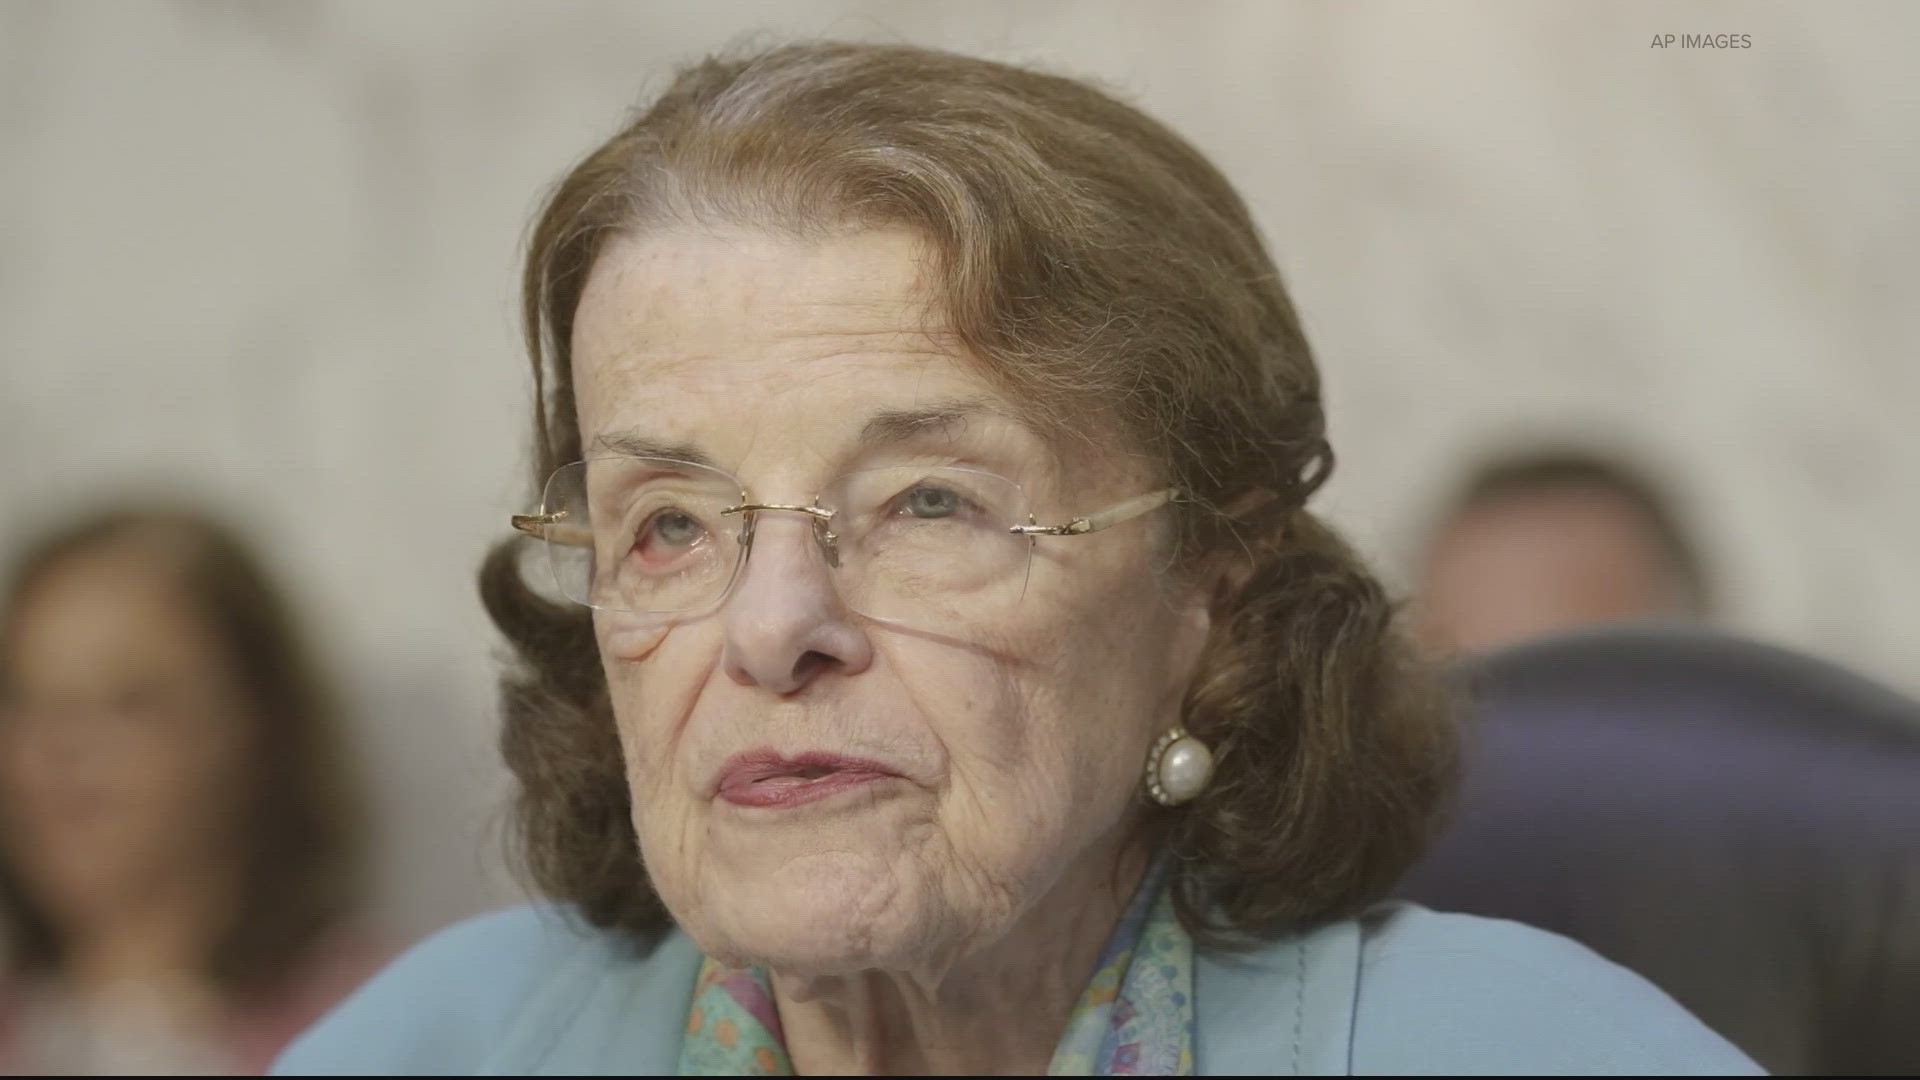 The California Democrat was the longest-serving female Senator in U-S history. She died at the age of 90 this morning in her DC home.